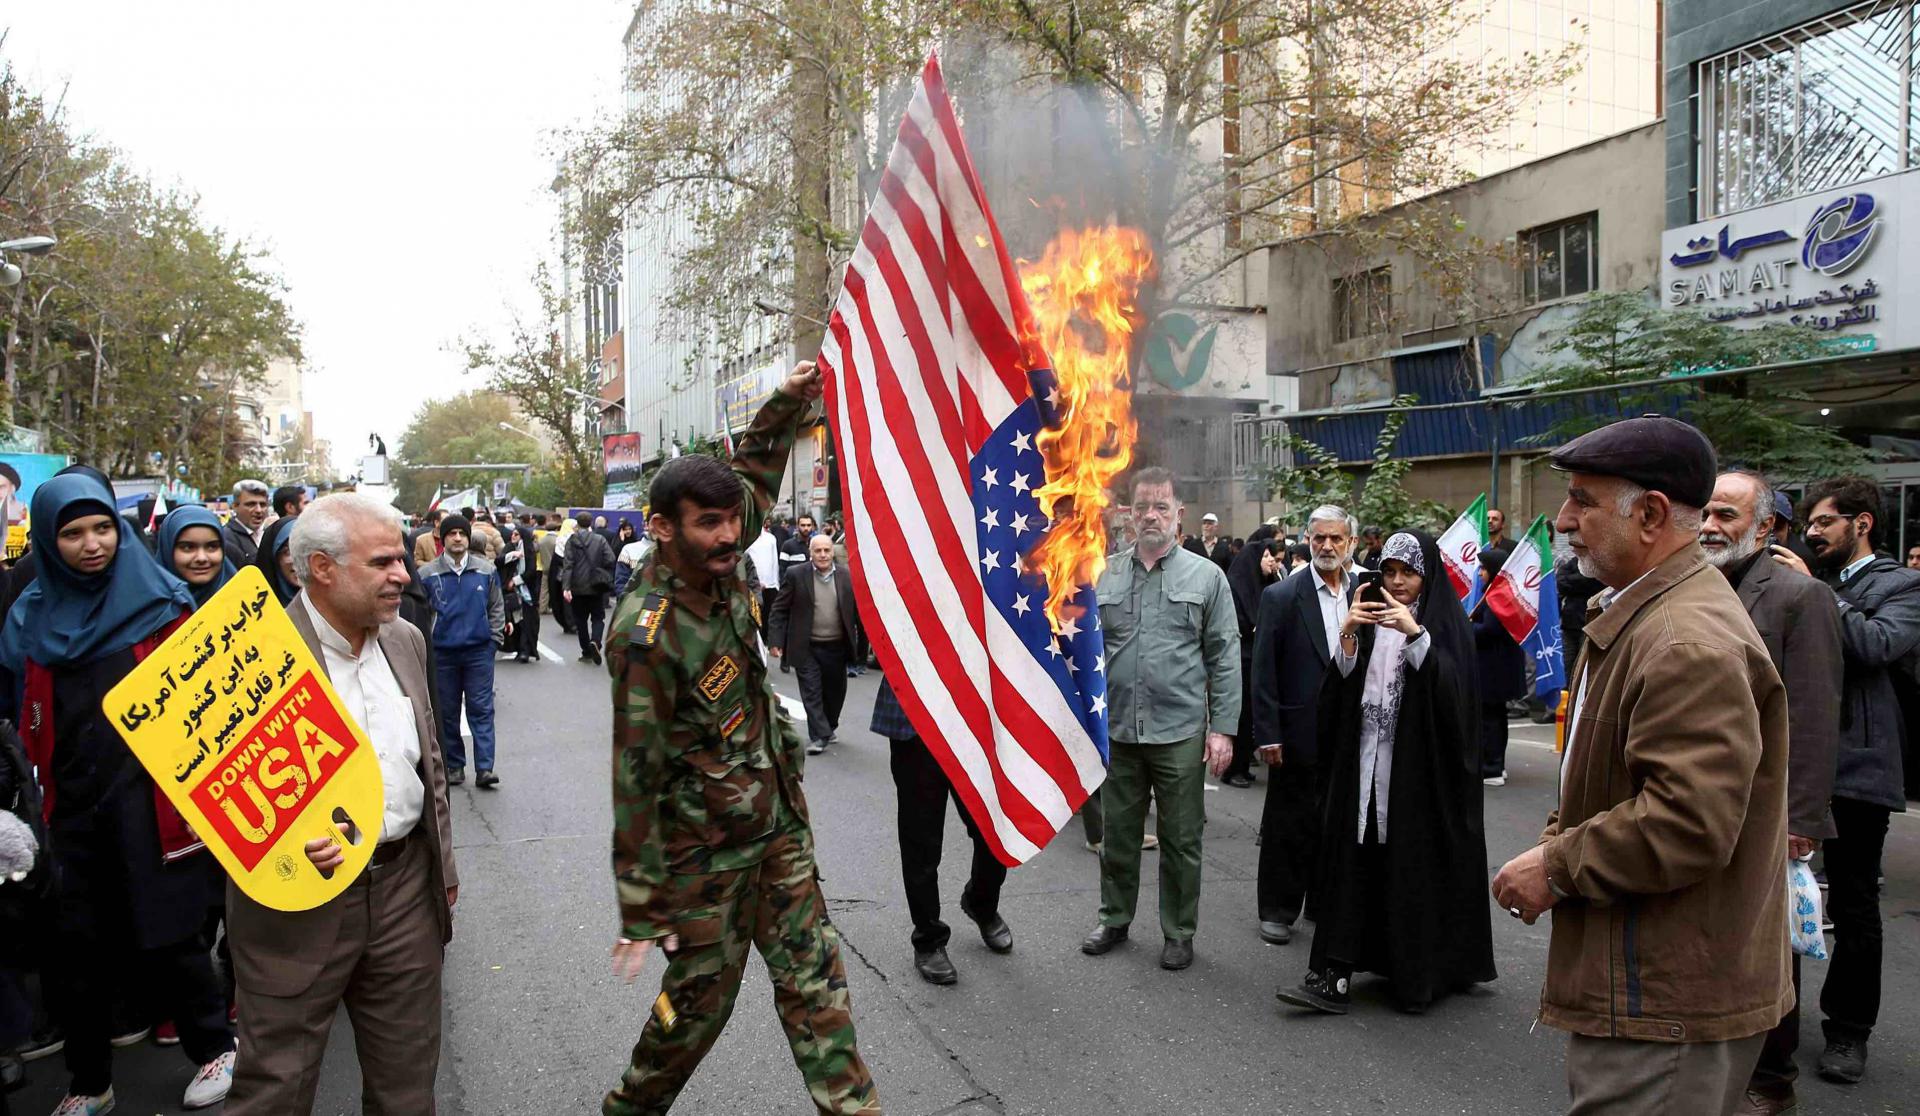 Iranians massed in front of the building carrying placards with slogans such as "Down with USA" and "Death to America."